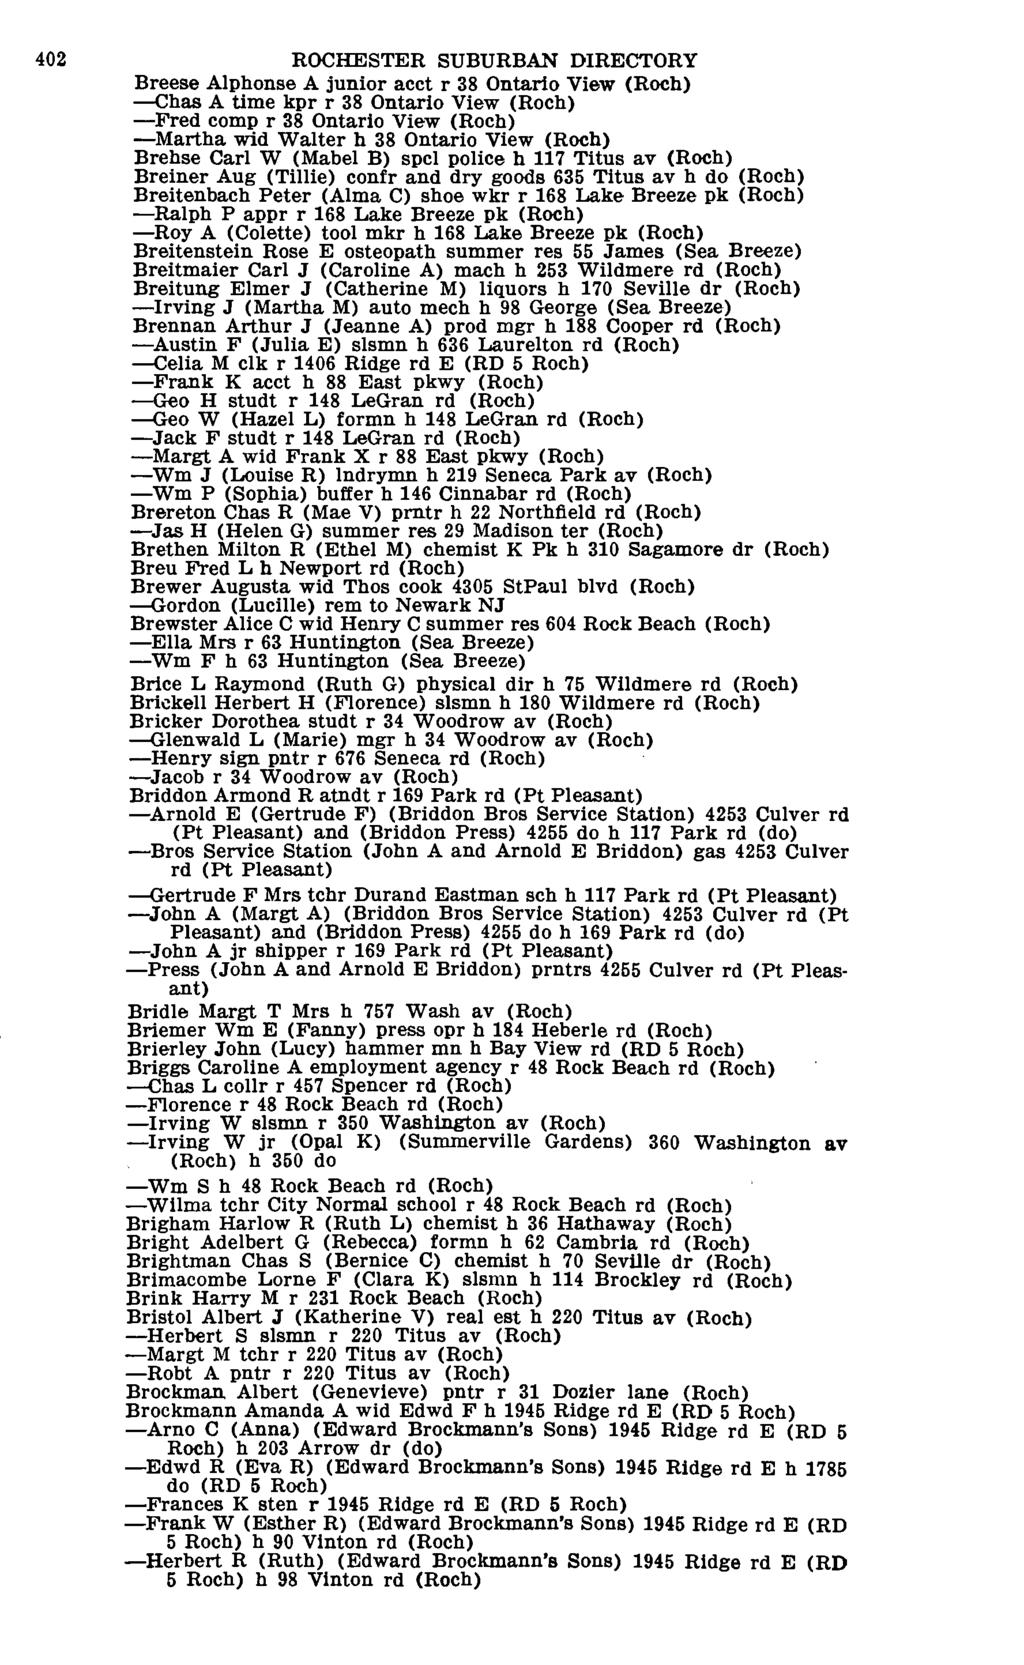 402 ROCHESTER SUBURBAN DIRECTORY Breese Alphonse A junior acct r 38 Ontario View Chas A time kpr r 38 Ontario View Fred comp r 38 Ontario View Martha wid Walter h 38 Ontario View Brehse Carl W (Mabel